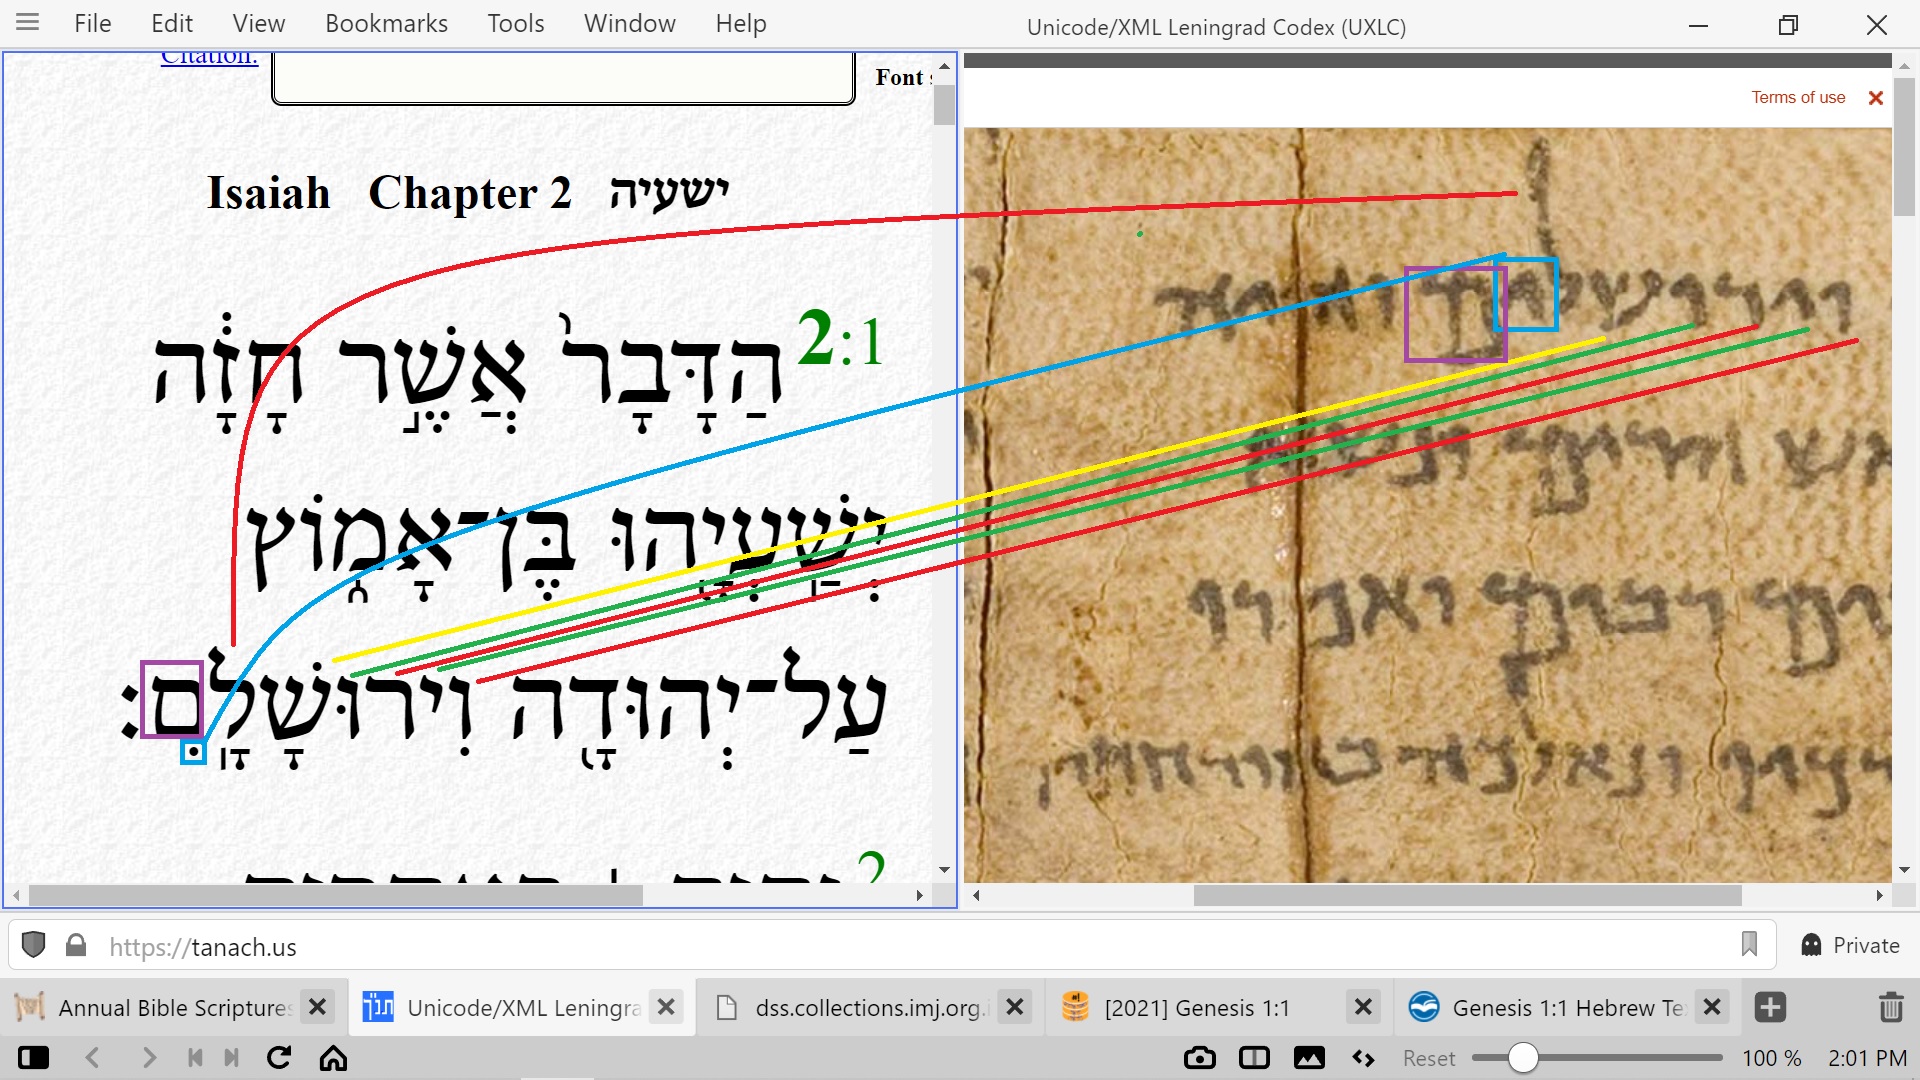 Isaiah 2 verse 1 in the Dead Sea Scrolls compared to the Masoretic Hebrew